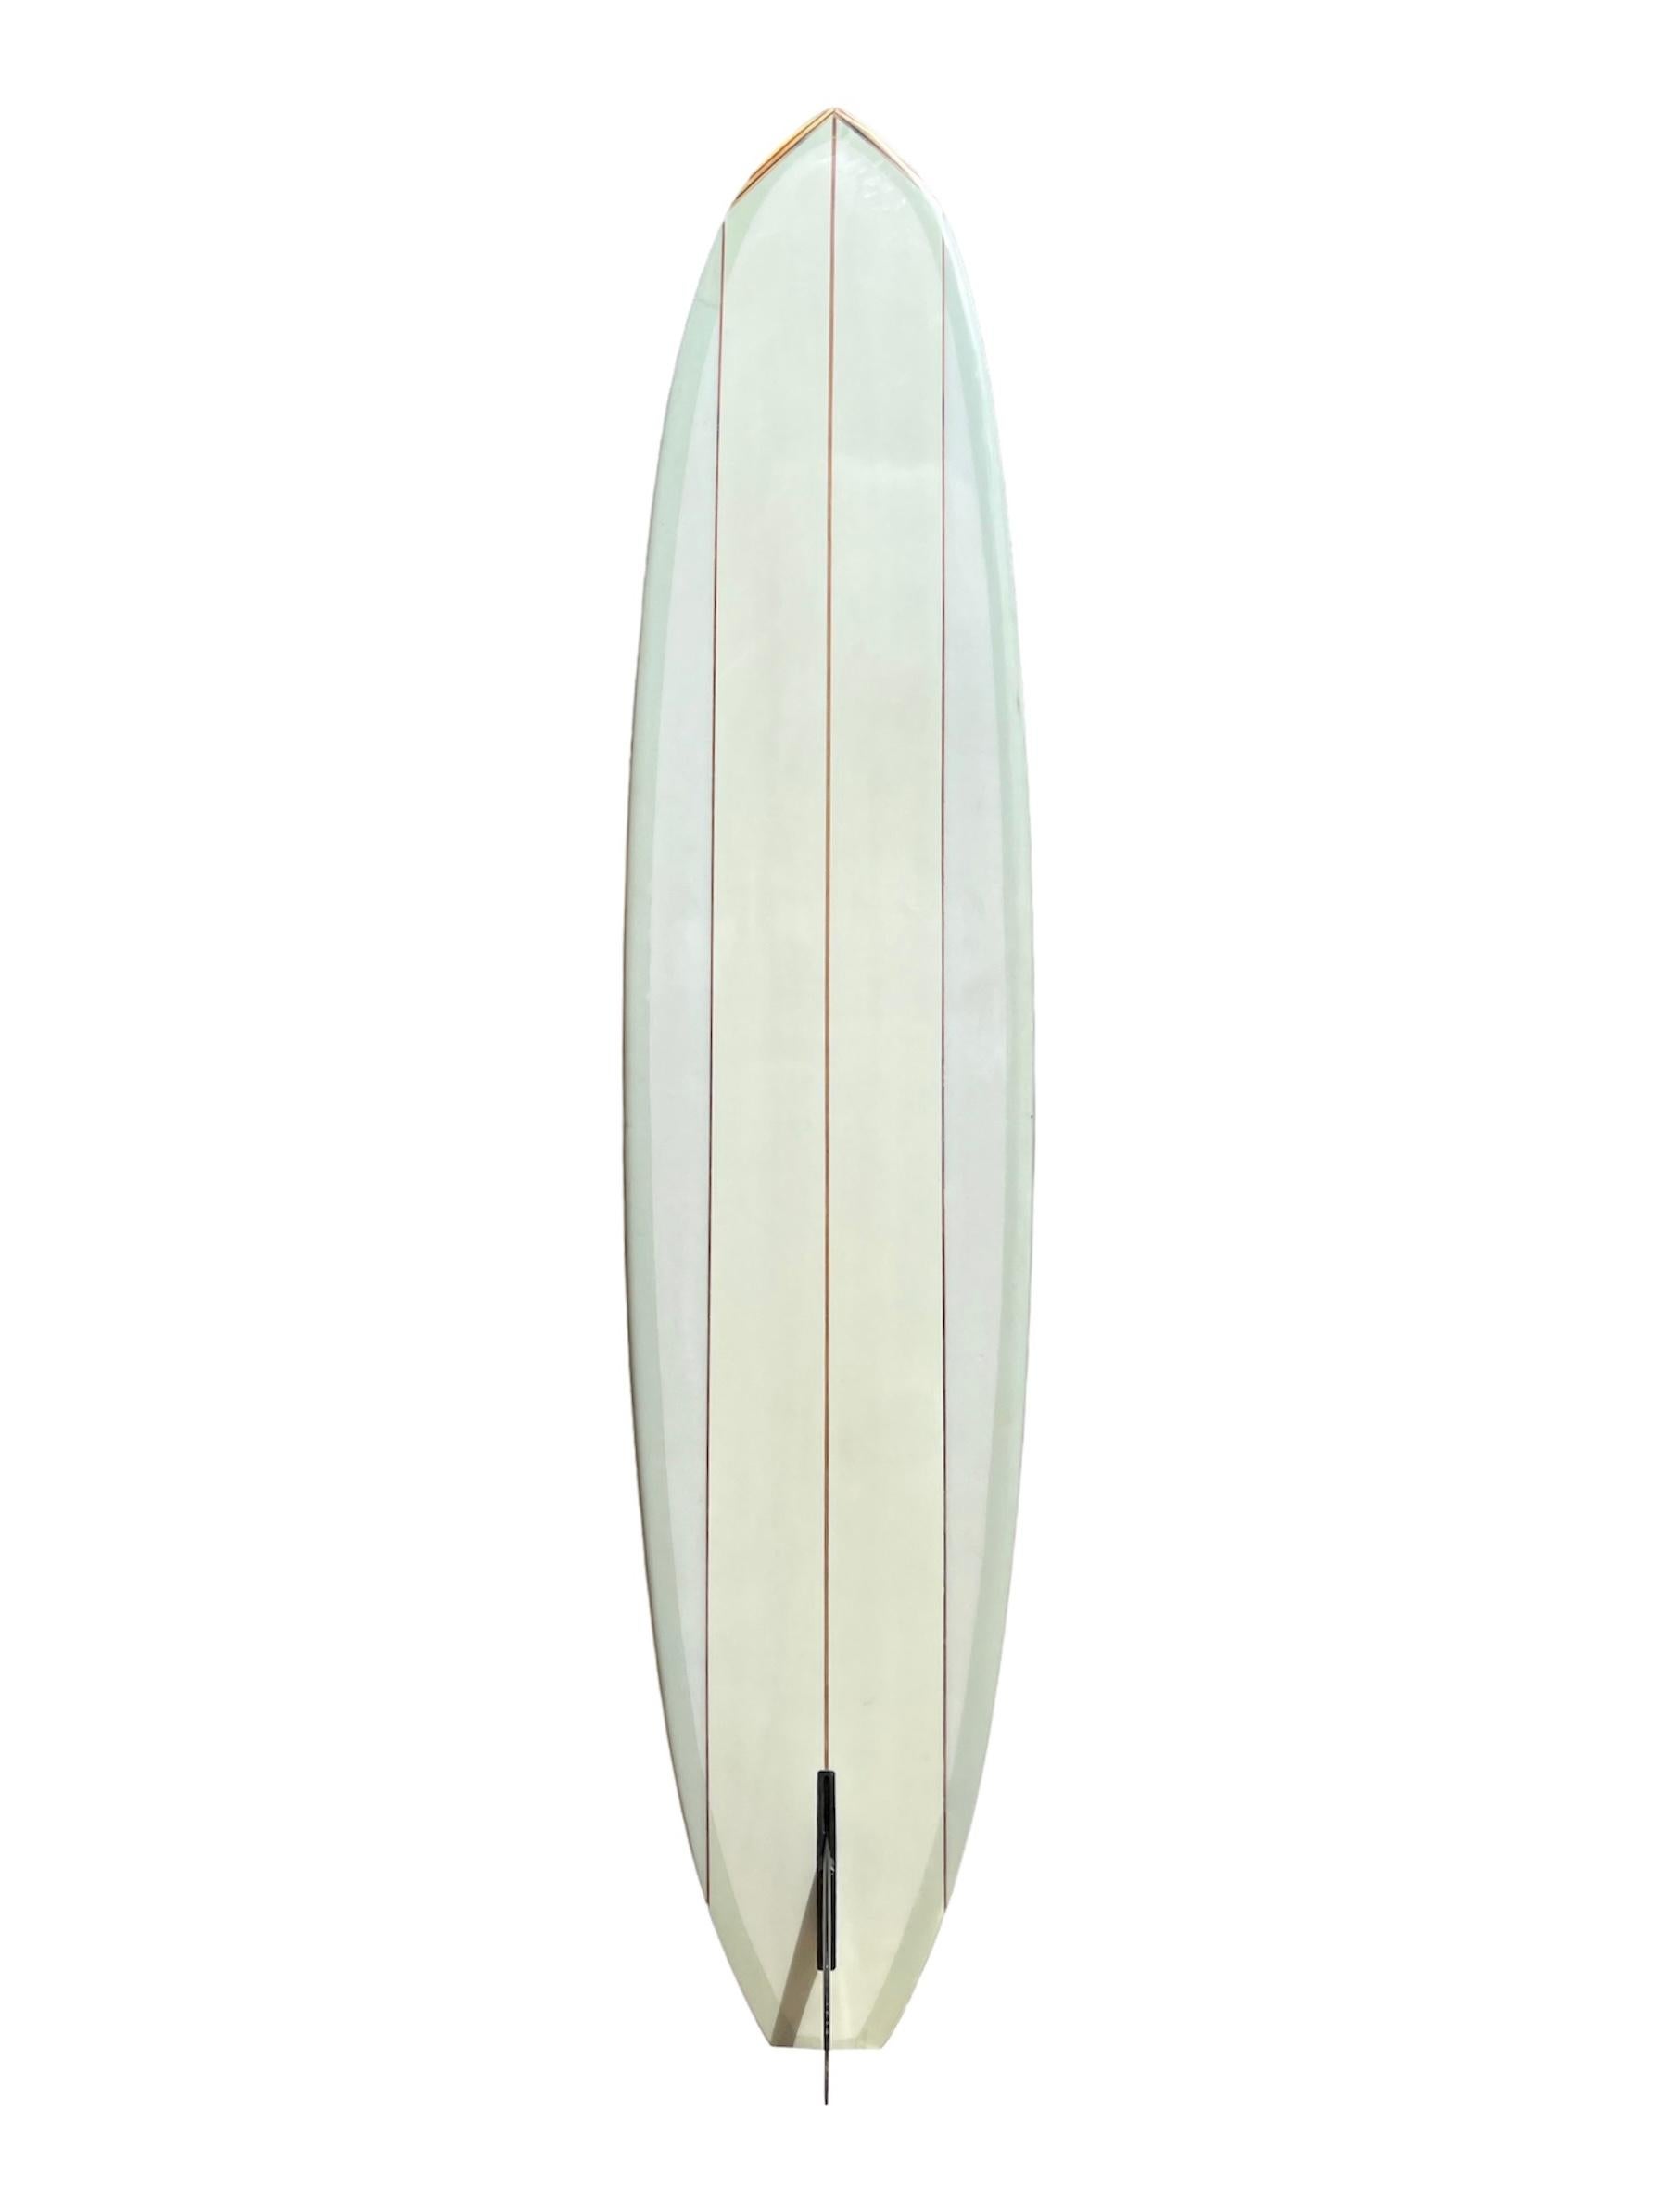 1990s Vintage Diffenderfer custom longboard made by late Mike Diffenderfer (1937-2002). Features 3 redwood stringers, wood nose and tail blocks, and pale green pinstriping. A wonderful example of a custom longboard shaped in Hawaii by the renowned